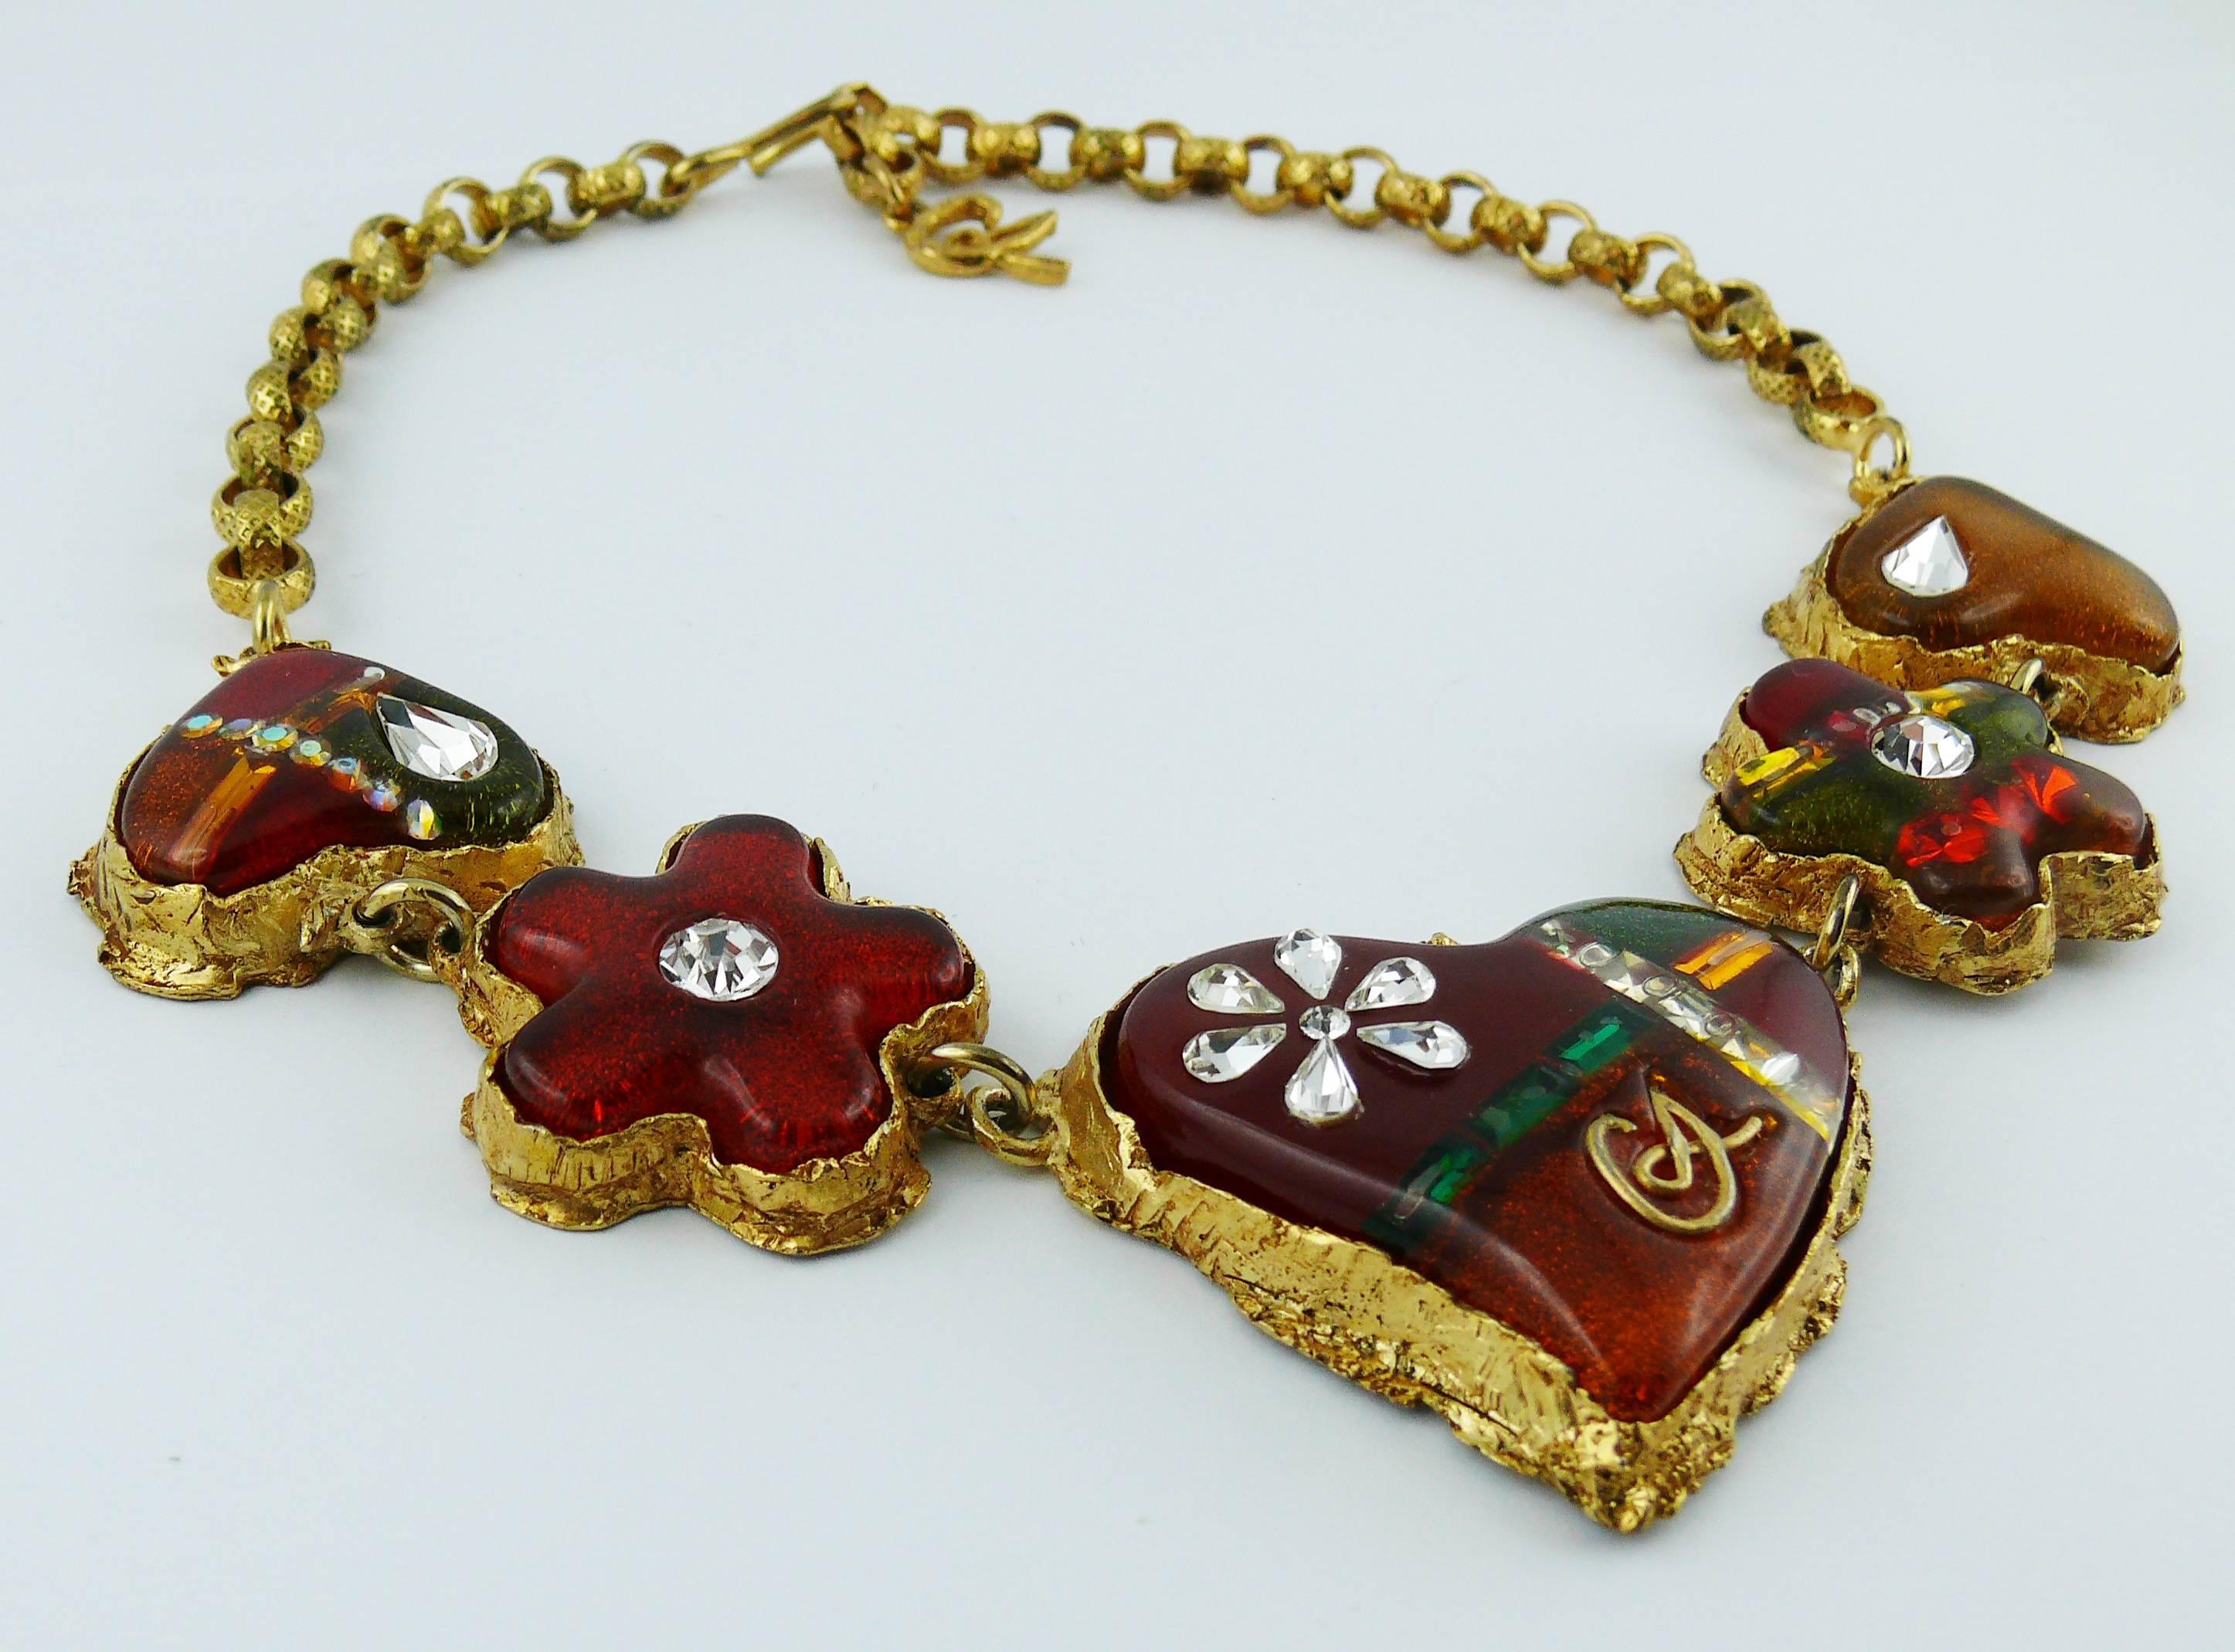 CHRISTIAN LACROIX gold toned necklace and earrings (clip-on) set featuring multicolored resin inlaid hearts and flowers with crystal embellishement.

Both necklace and earrings are marked CHRISTIAN LACROIX CL Made in France.

NECKLACE indicative